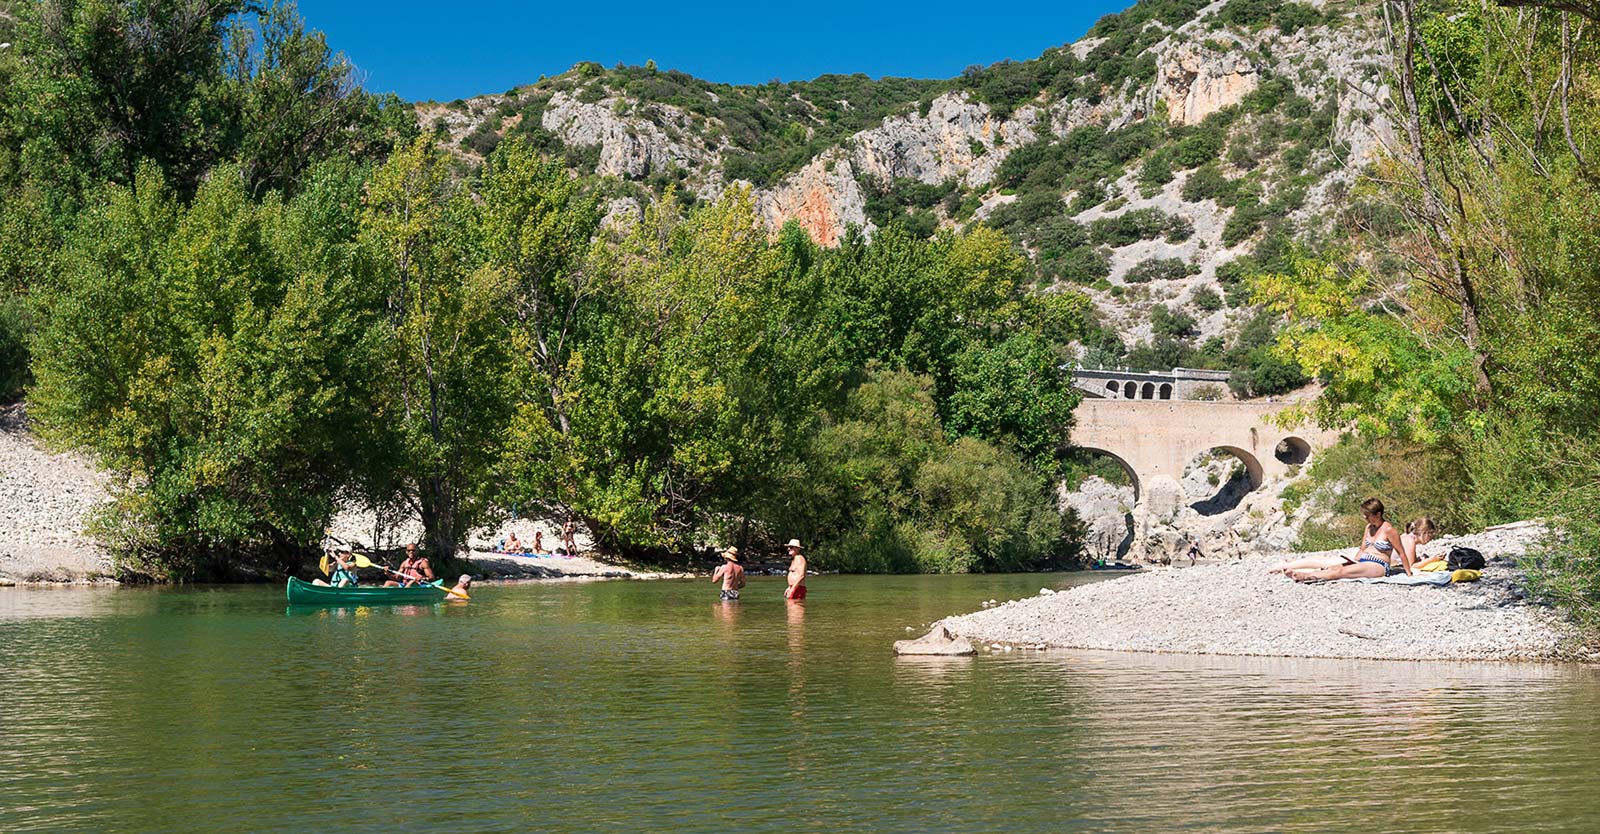 Bathers and canoeing on the Hérault in Canet in Hérault